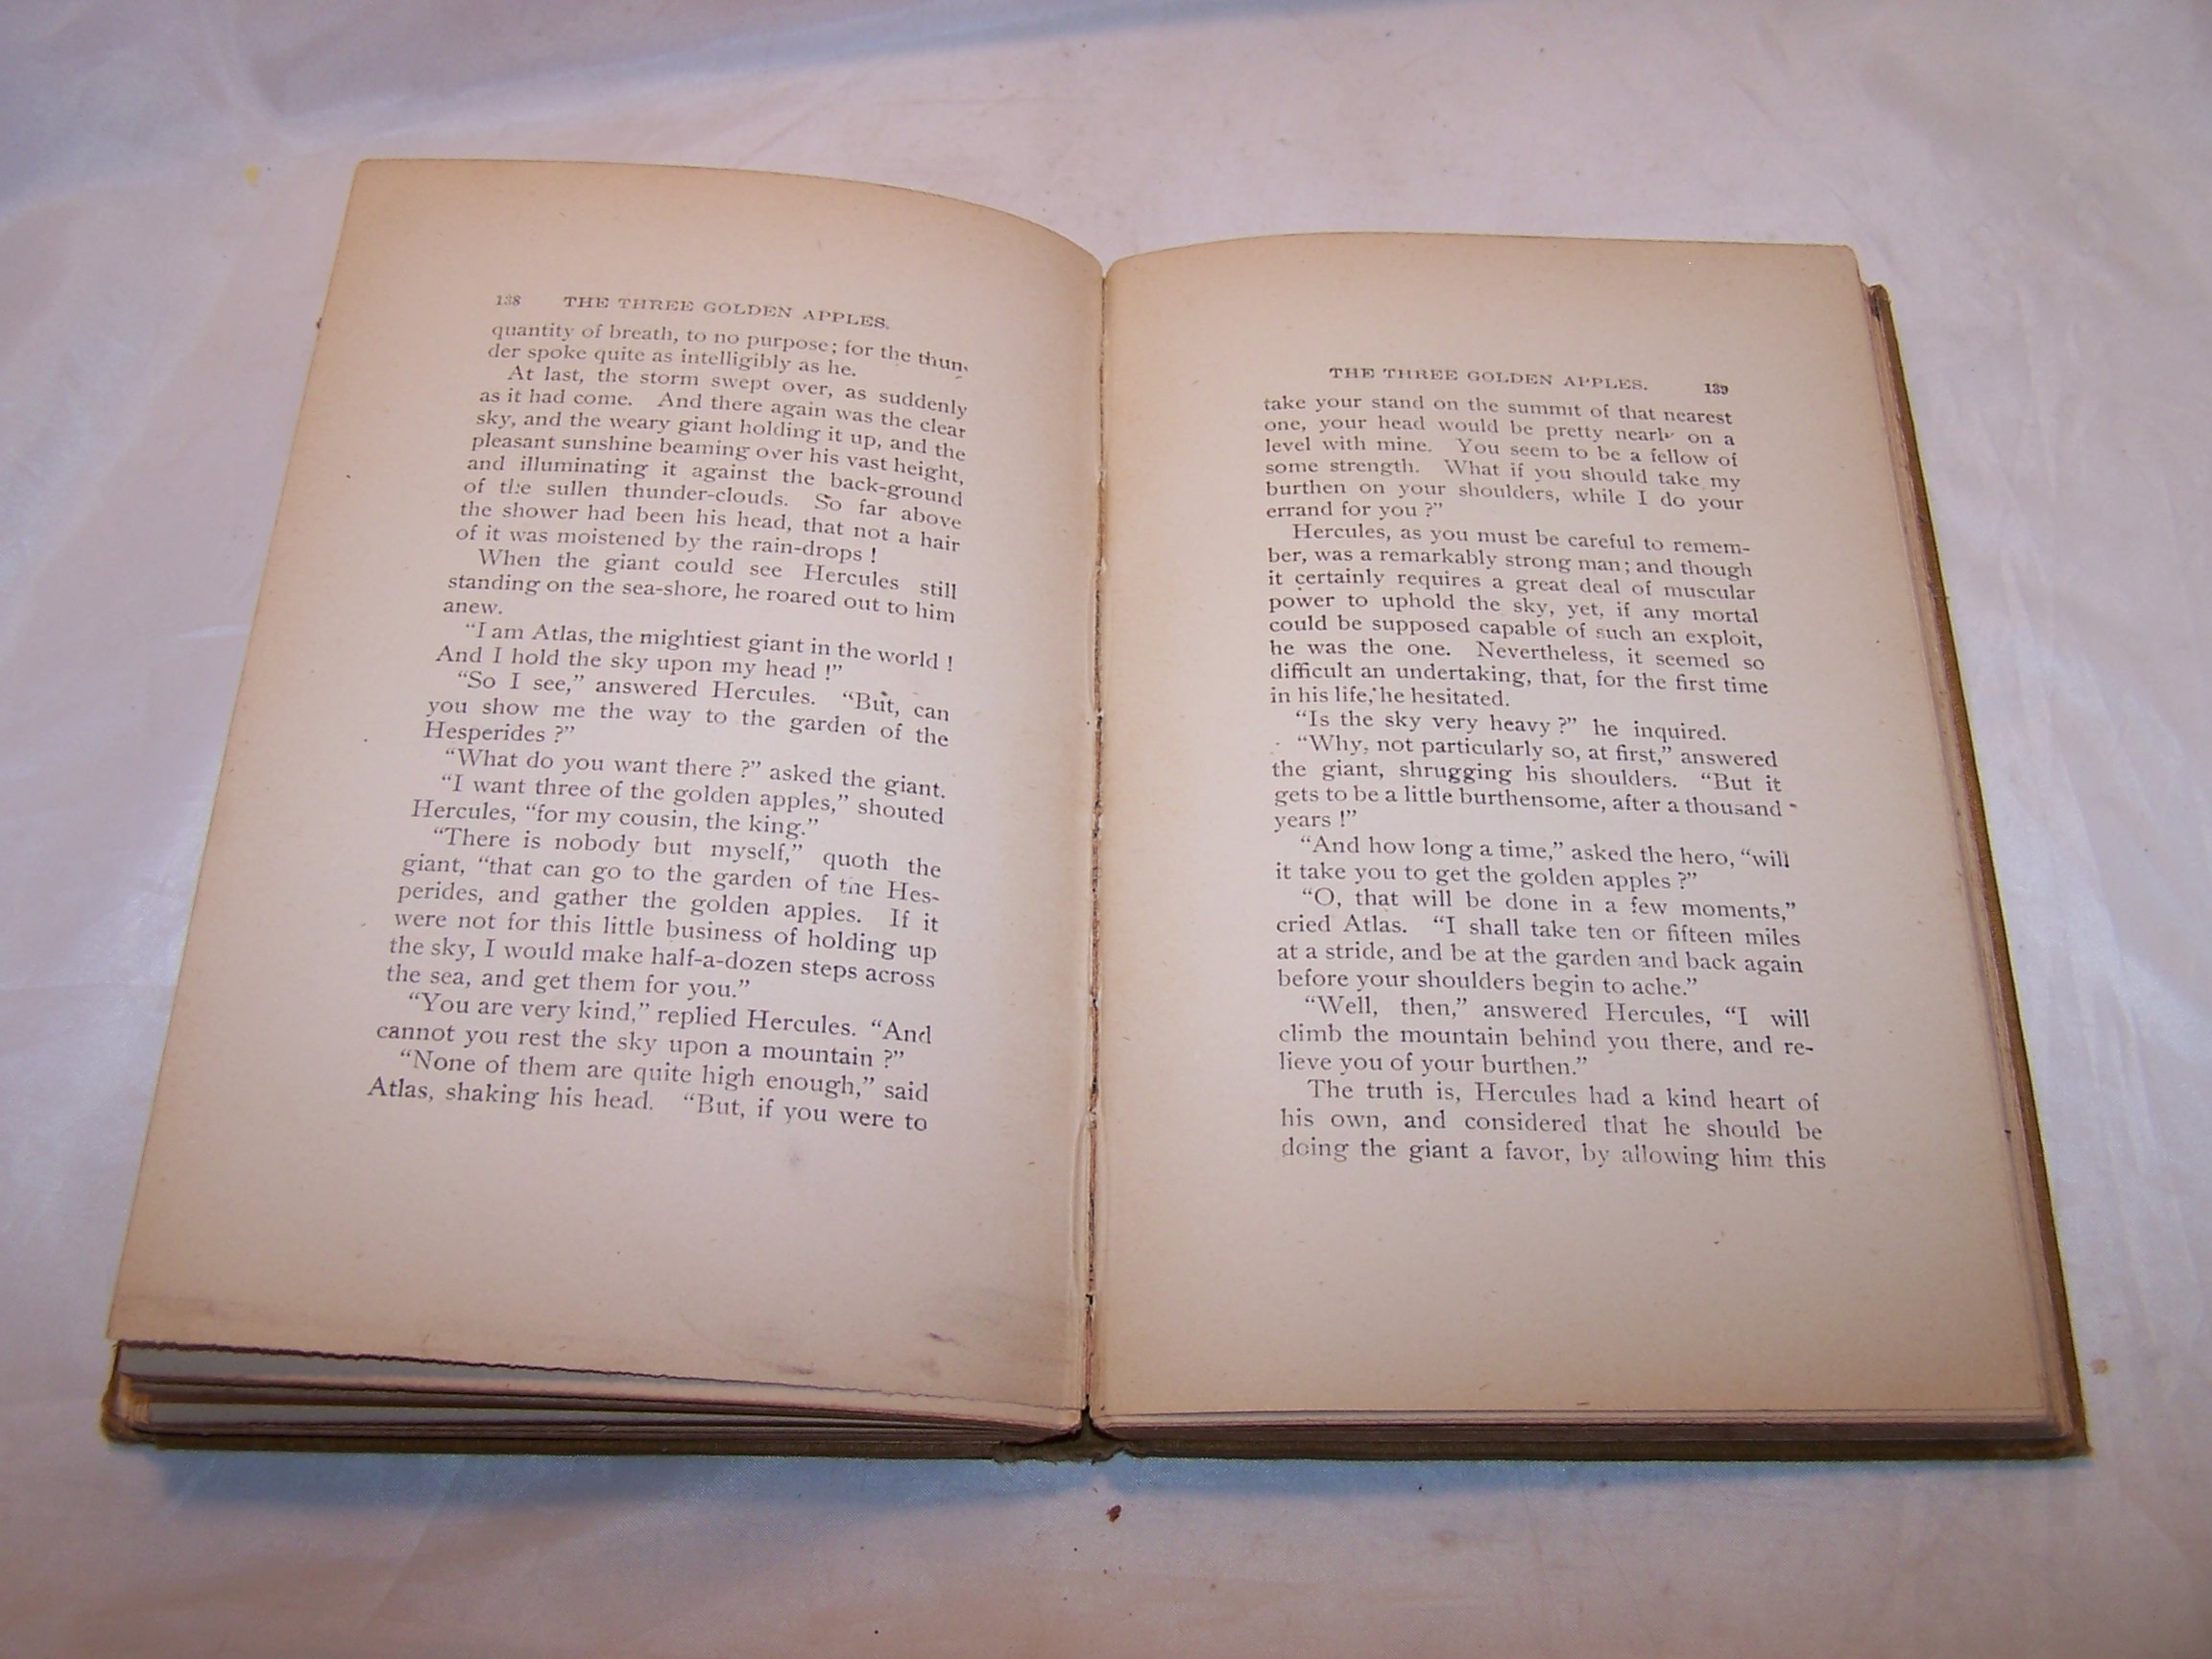 Image 5 of Wonder Book for Boys and Girls, Hawthorne, First Edition, Donohue and Co.